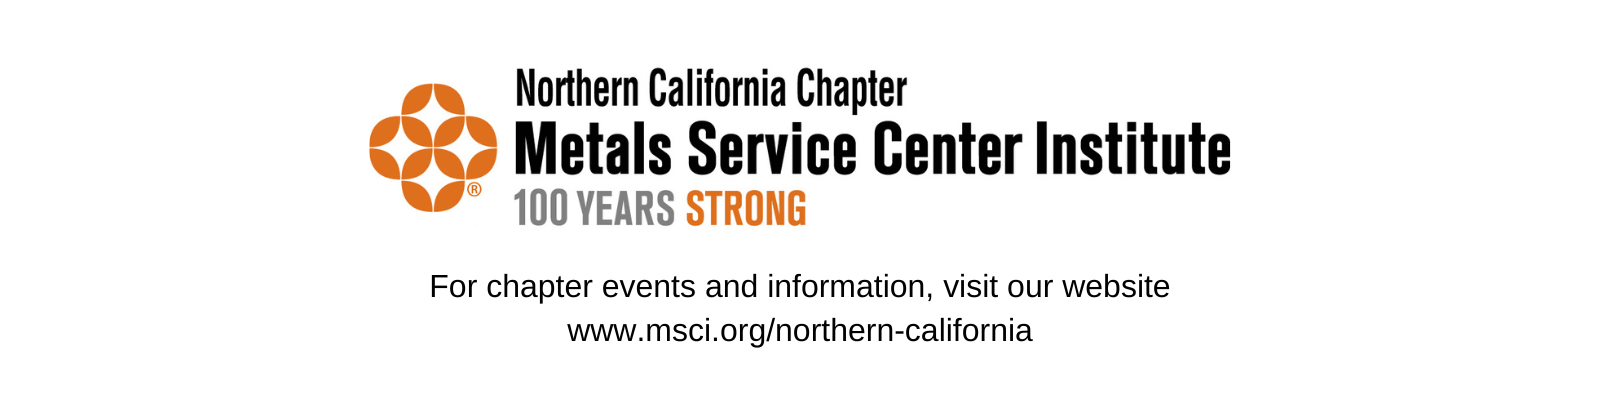 Metals Service Center Institute, Northern California Chapter